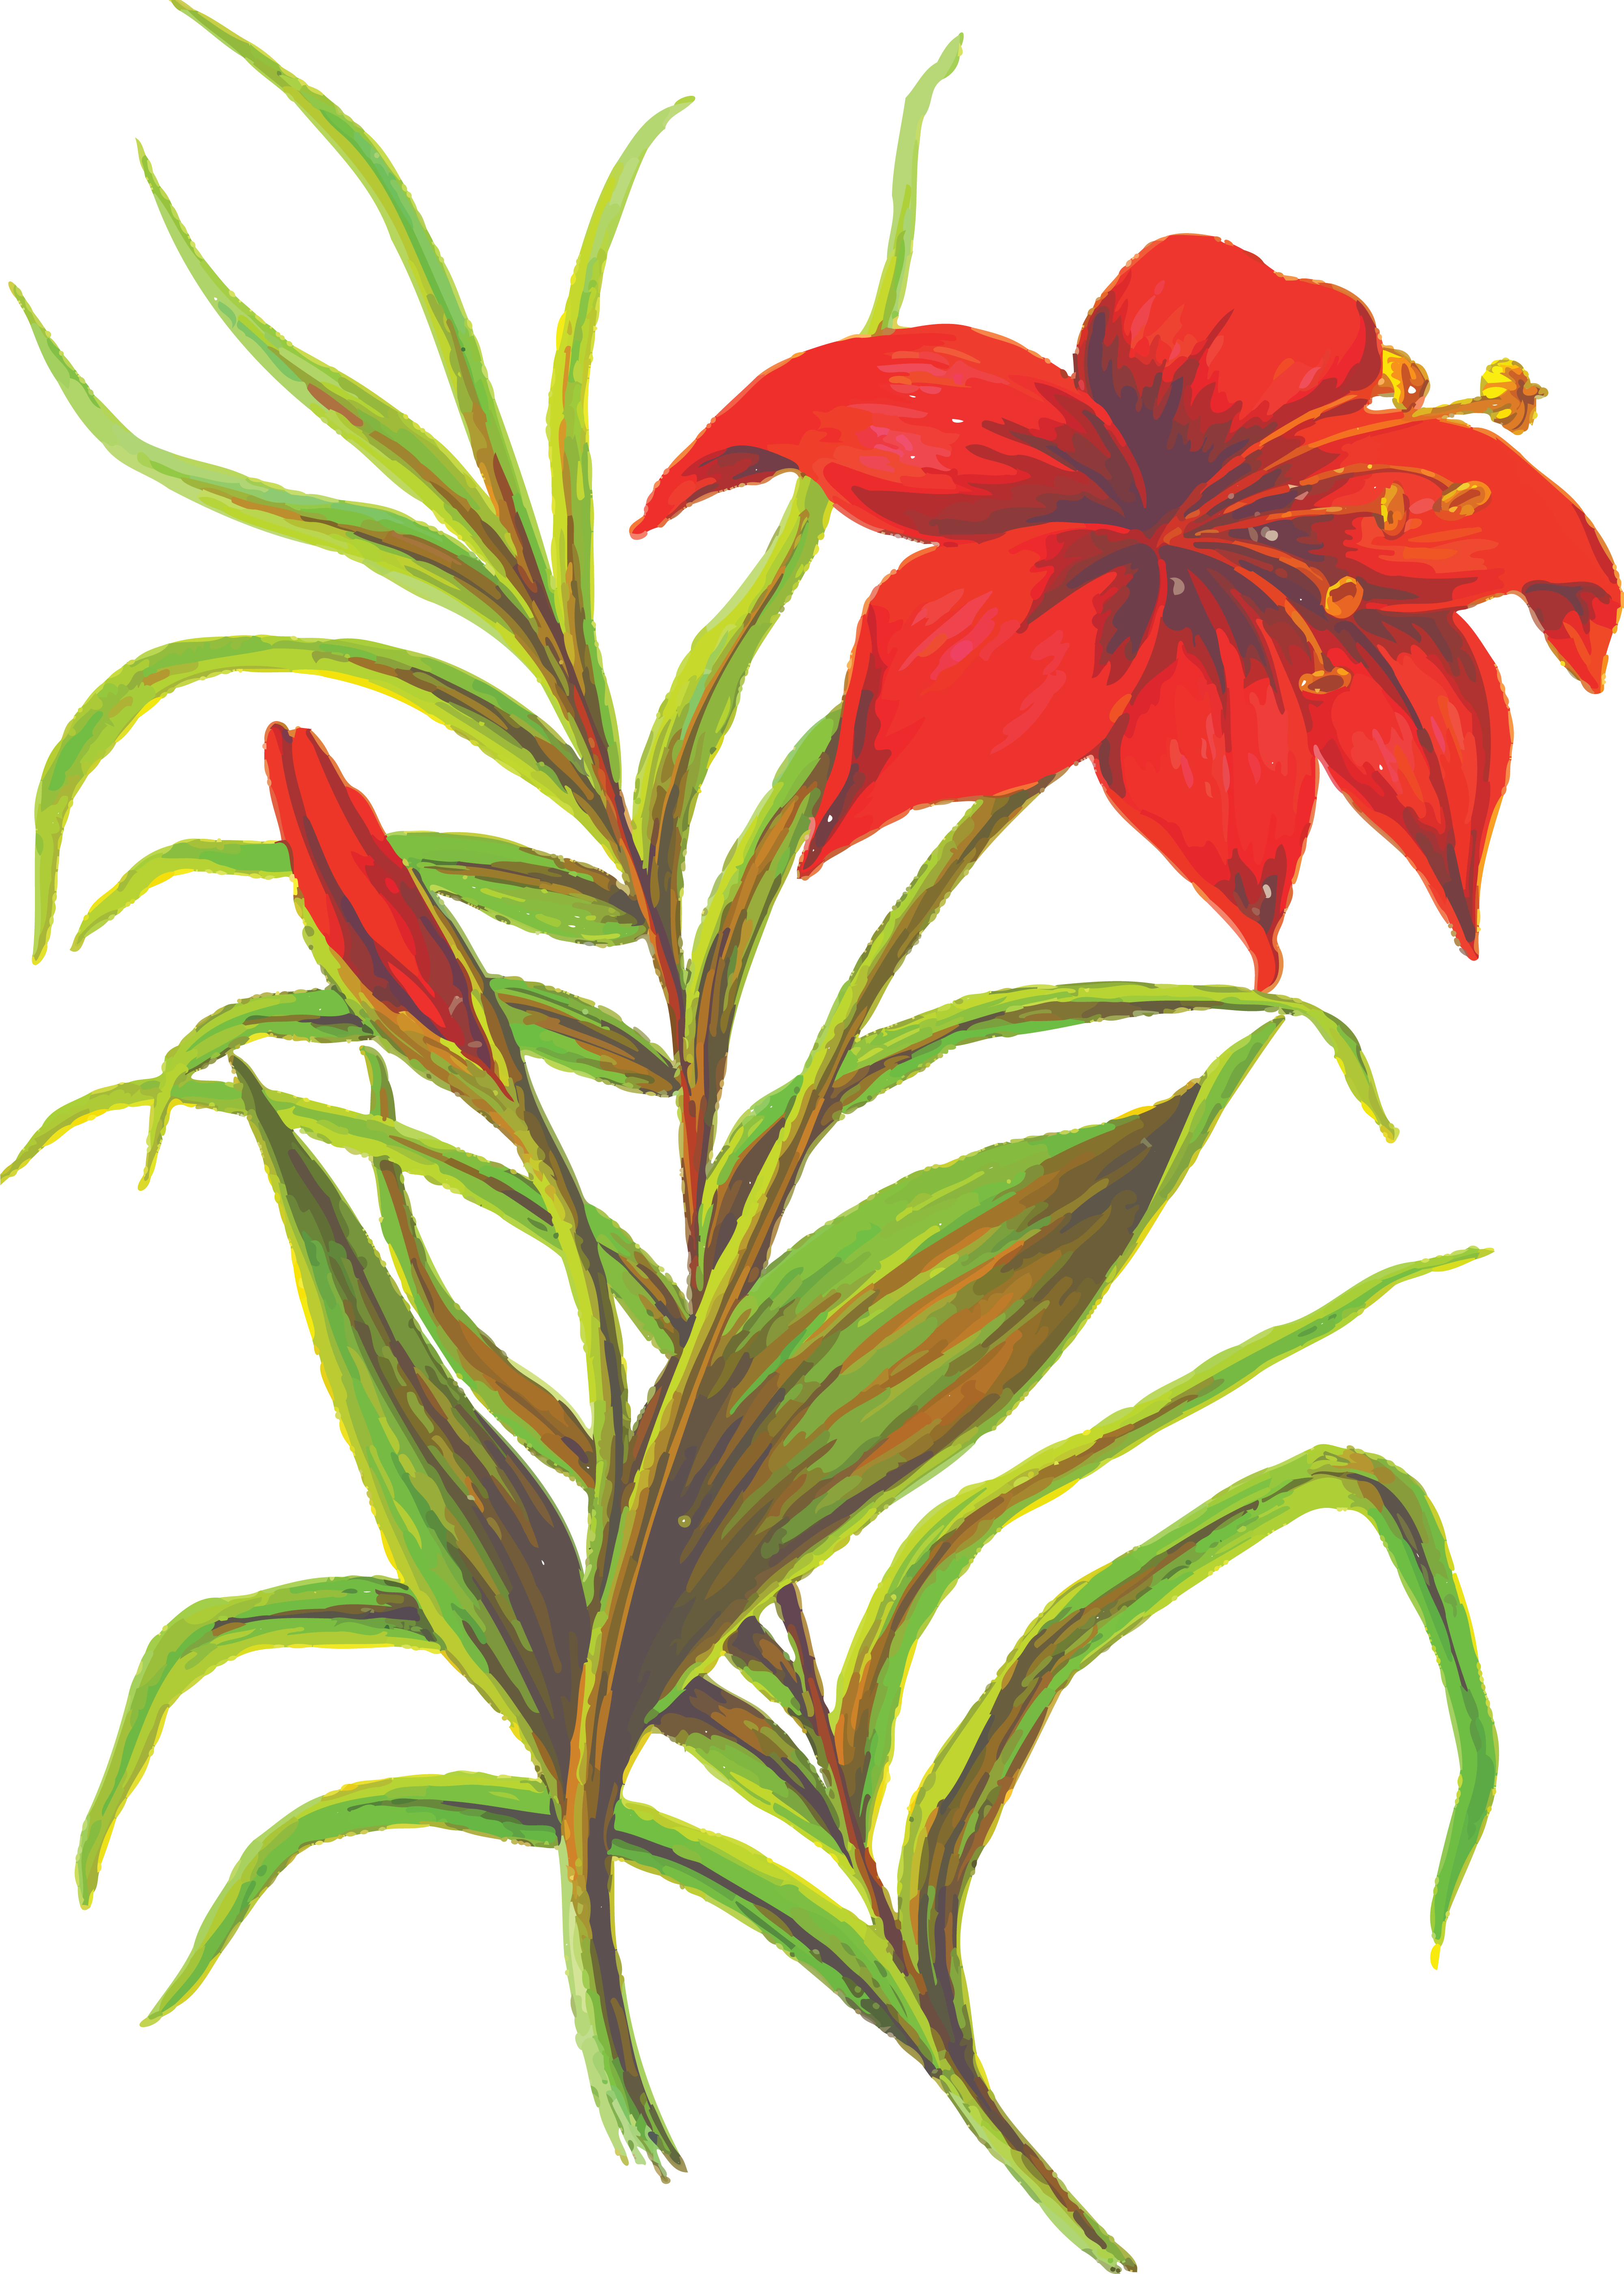 Download Free Clipart Of A lily plant